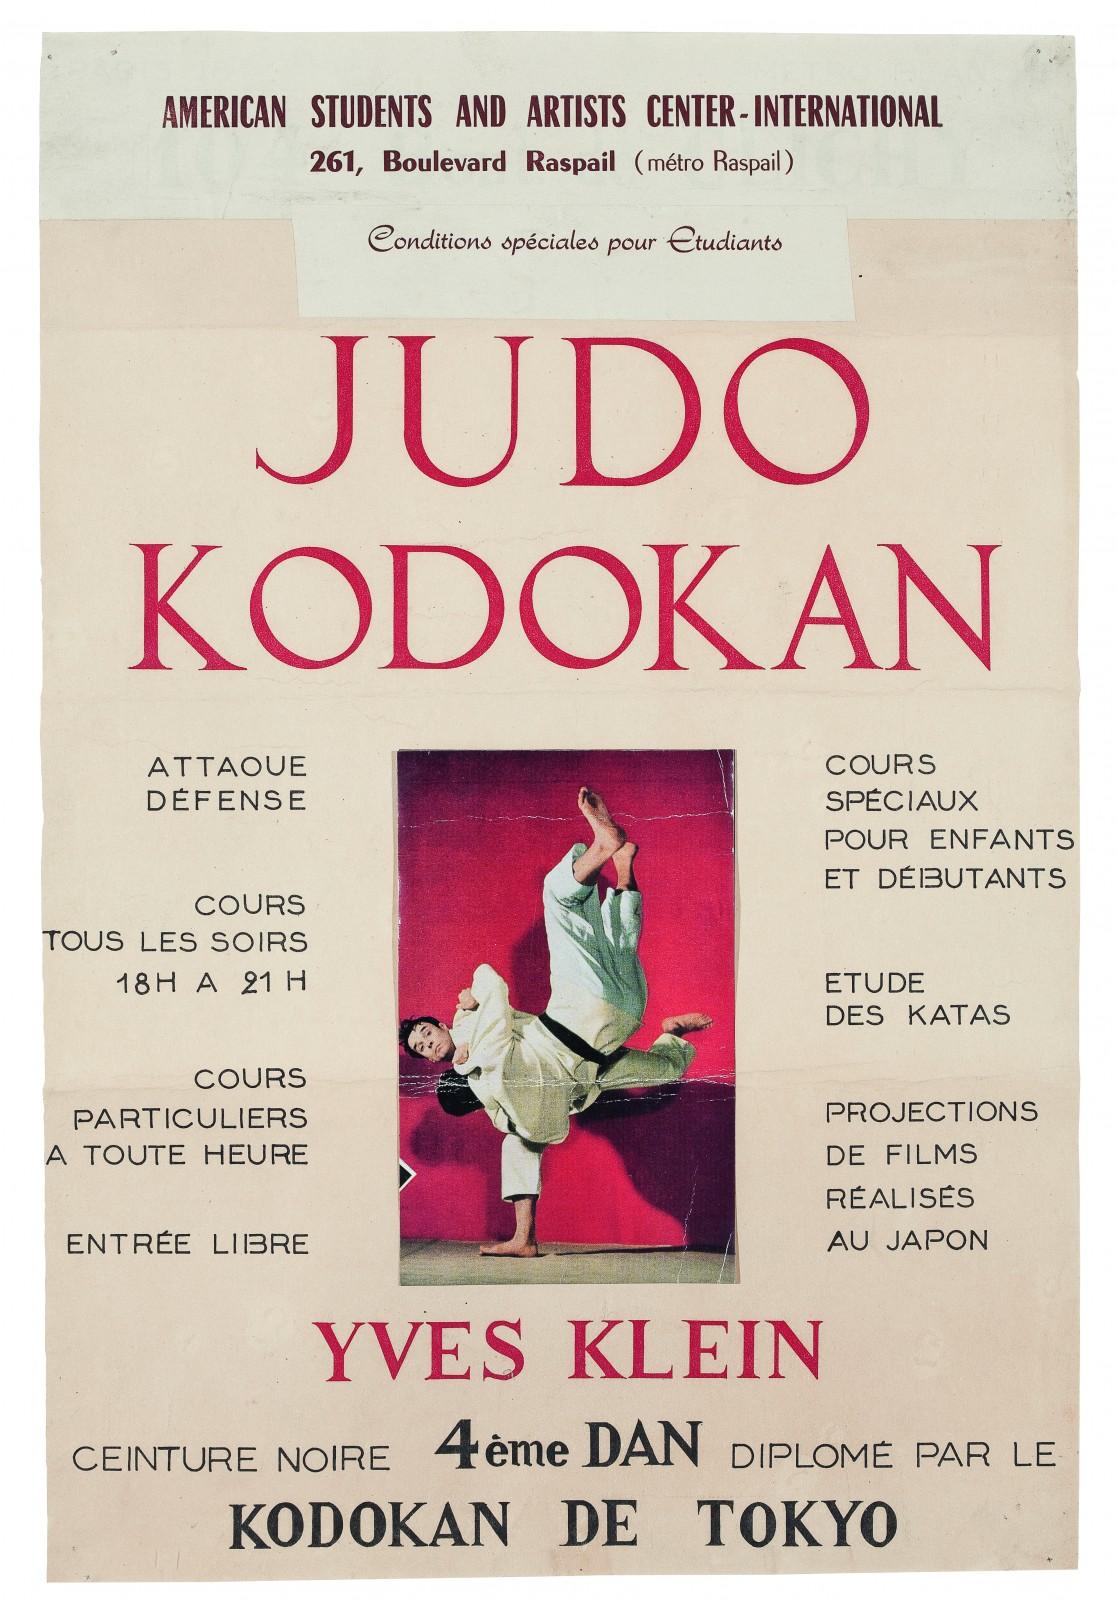 Poster for Yves Klein's Judo lessons at the American Students and Artists Center, 261 Boulevard Raspail, Paris